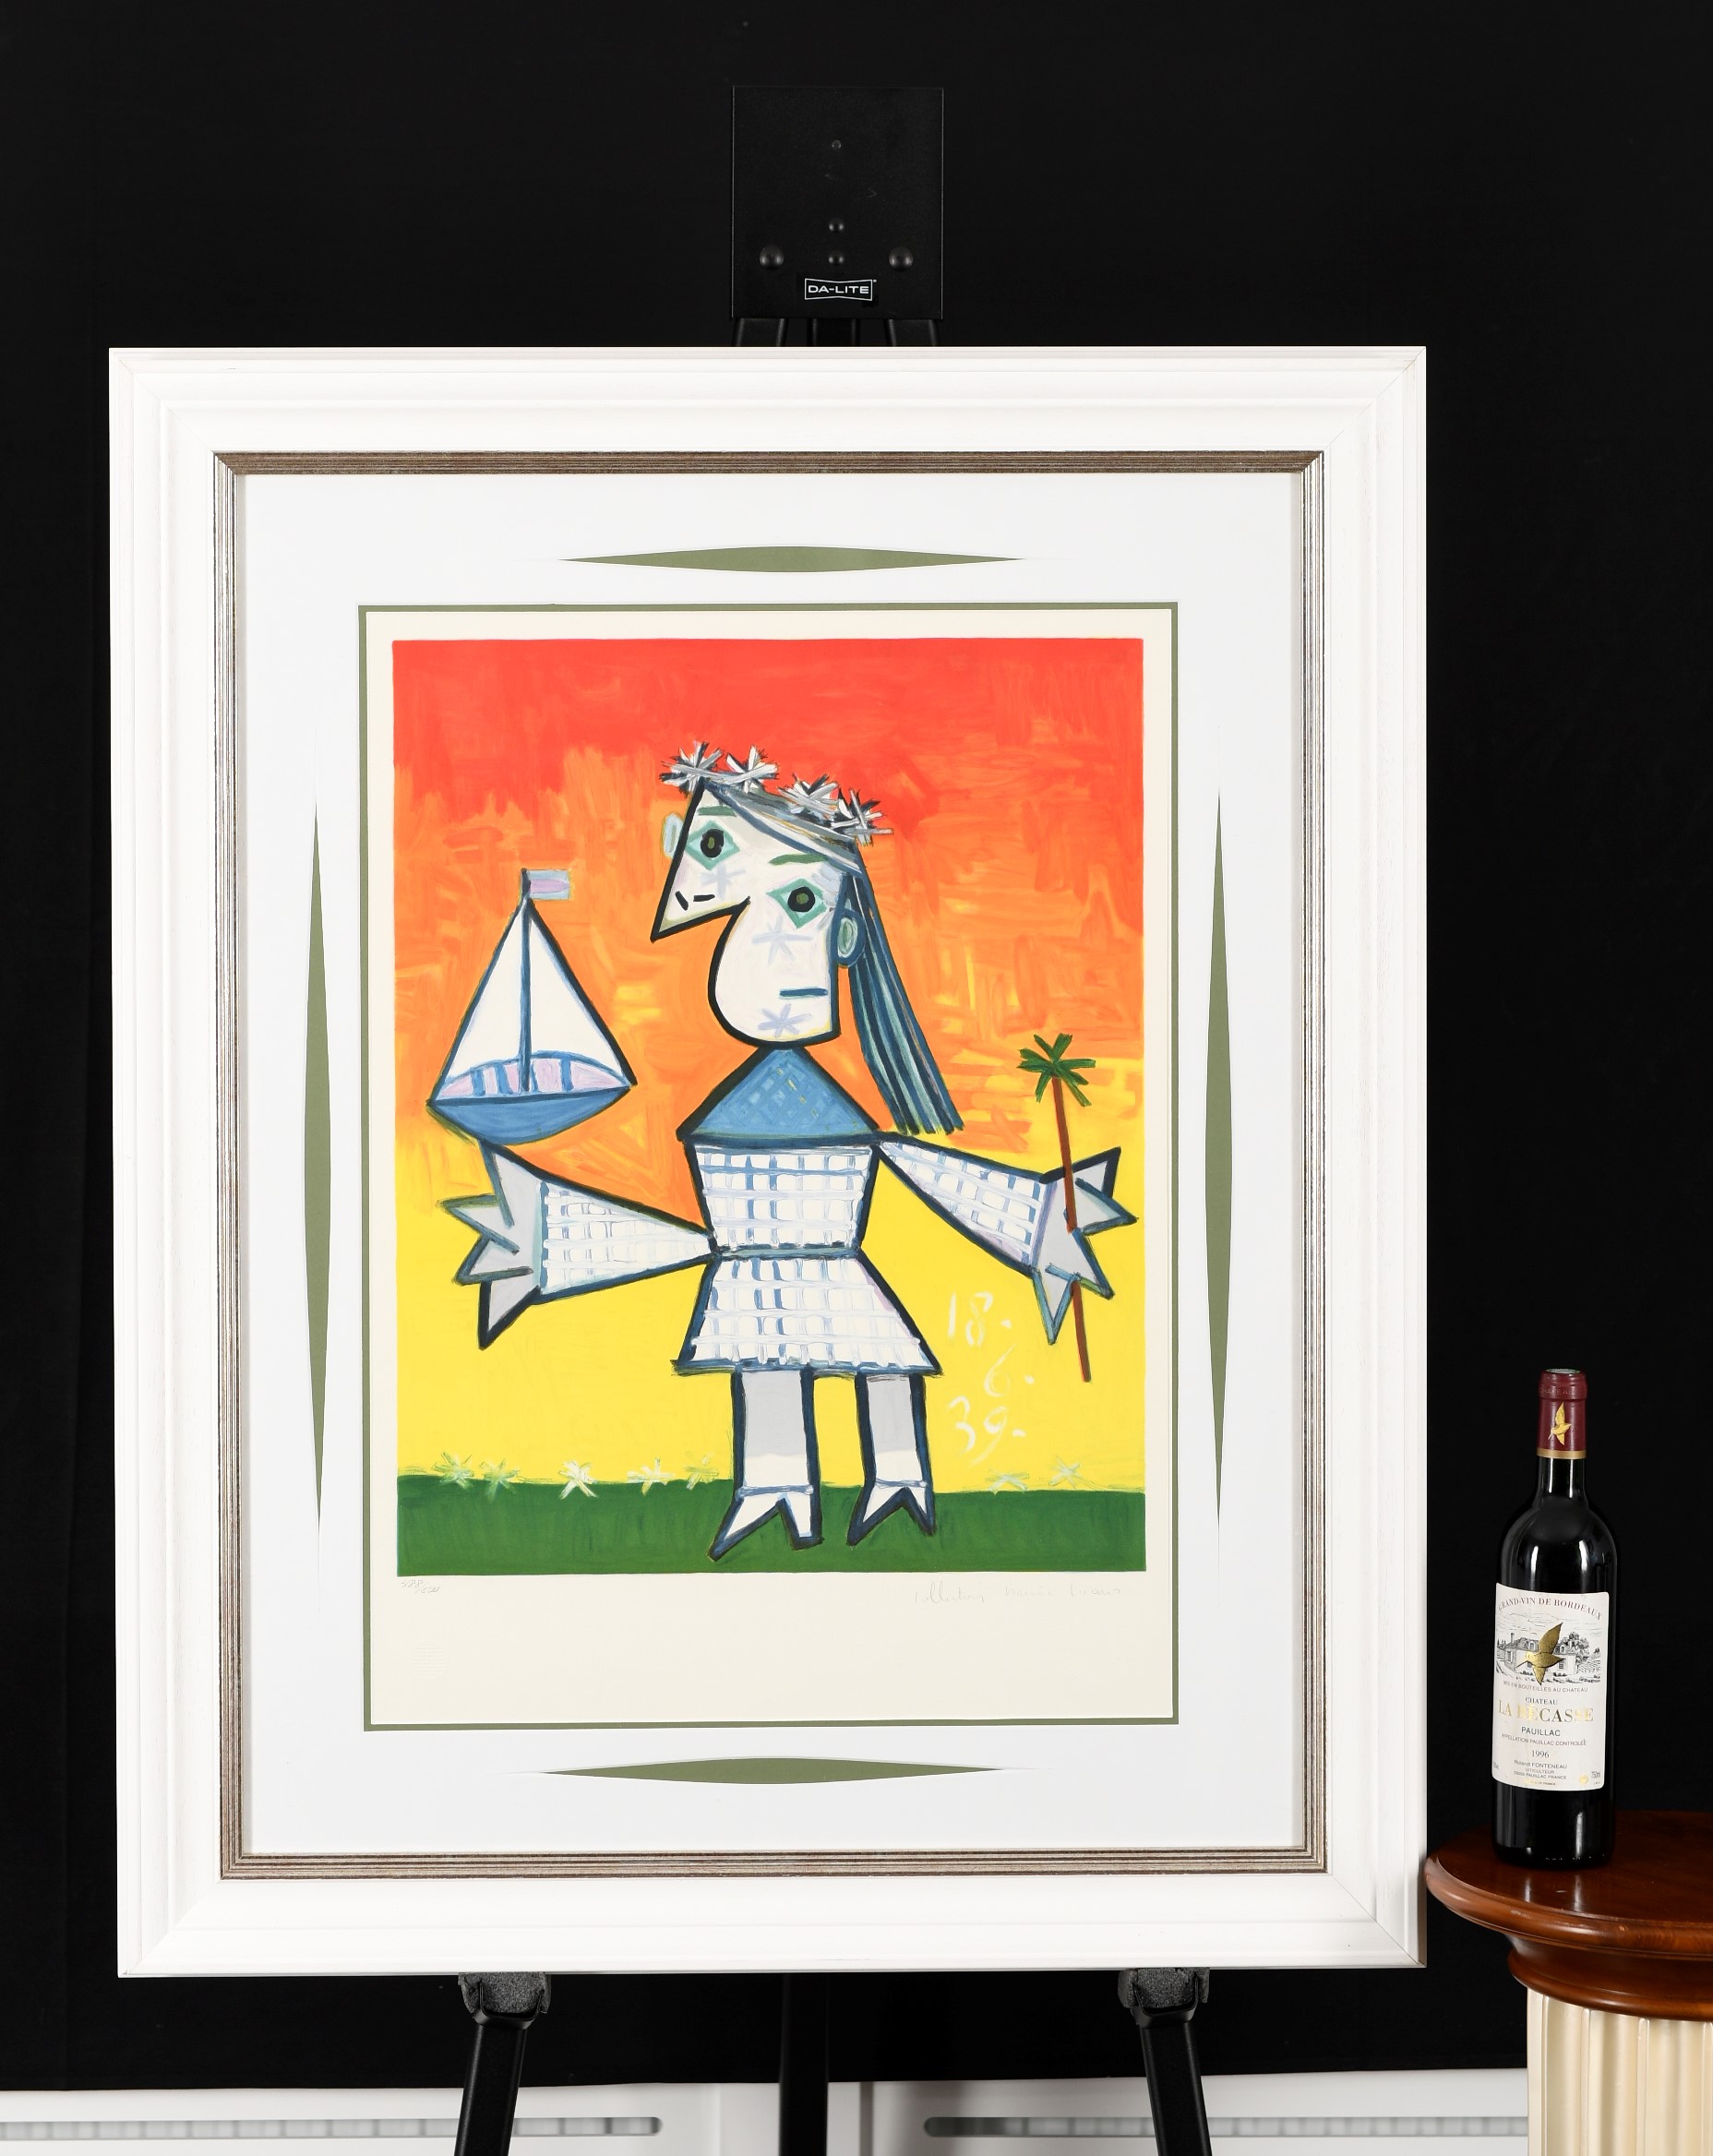 Rare Signed Limited Edition by Pablo Picasso - Image 3 of 13